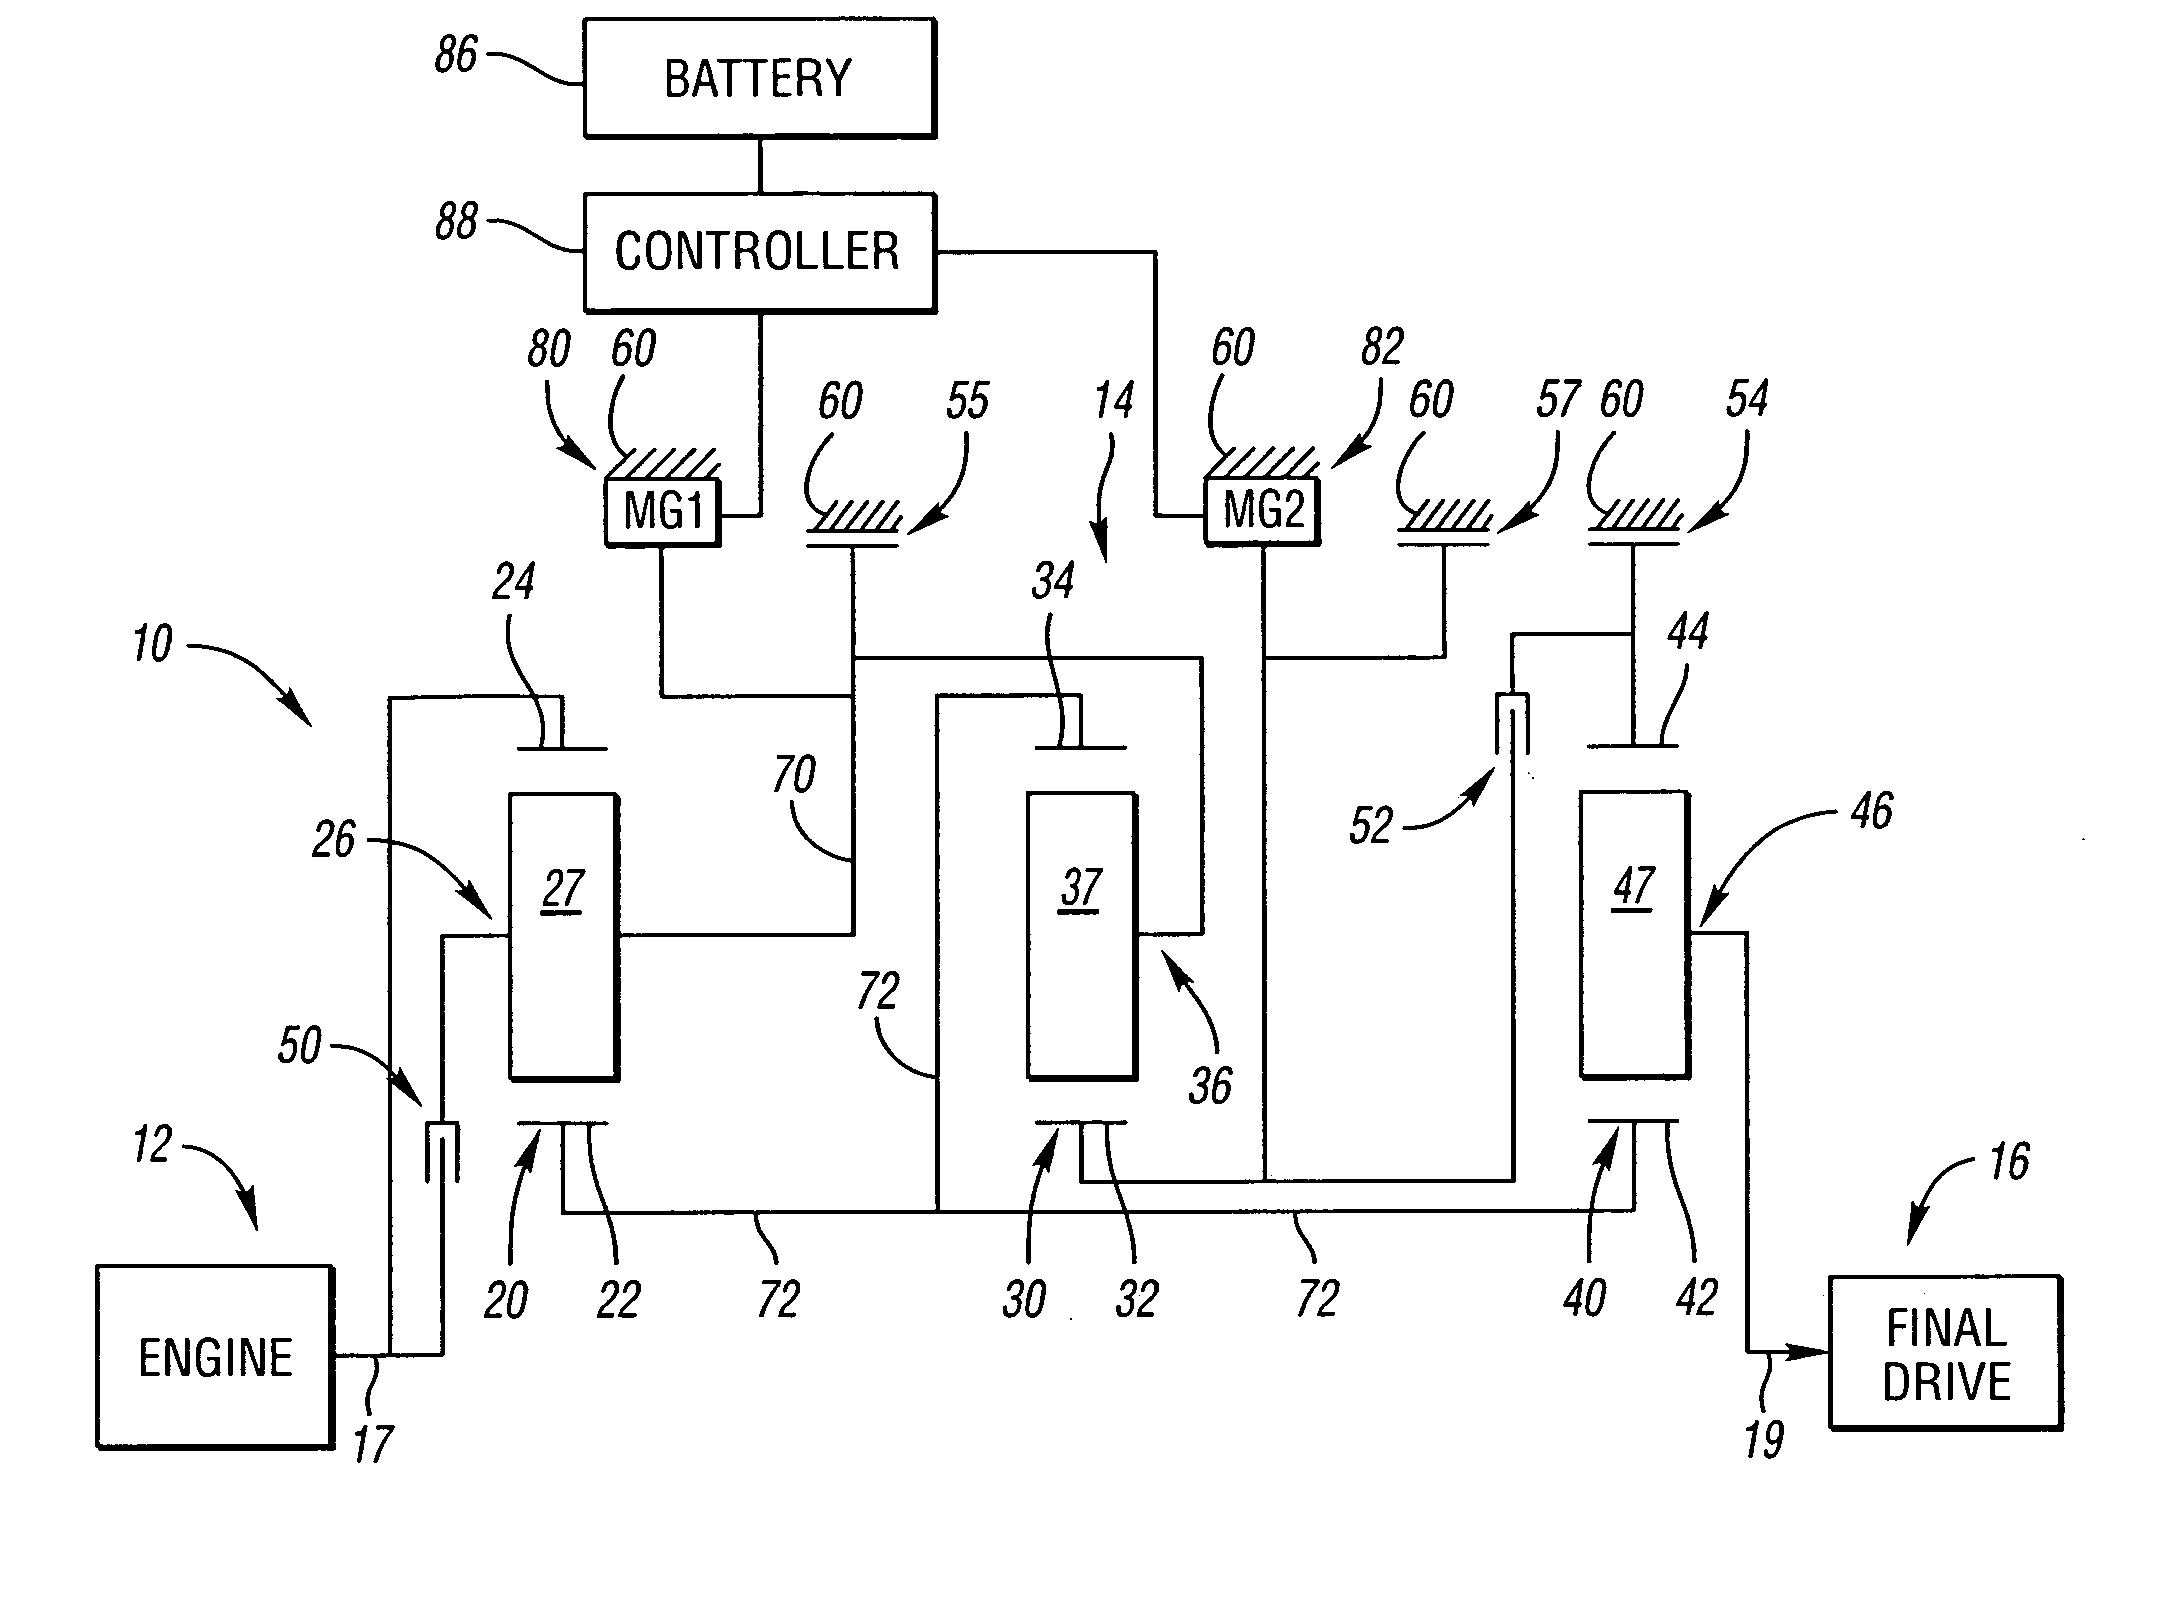 Electrically variable transmision having three interconnected planetary gear sets